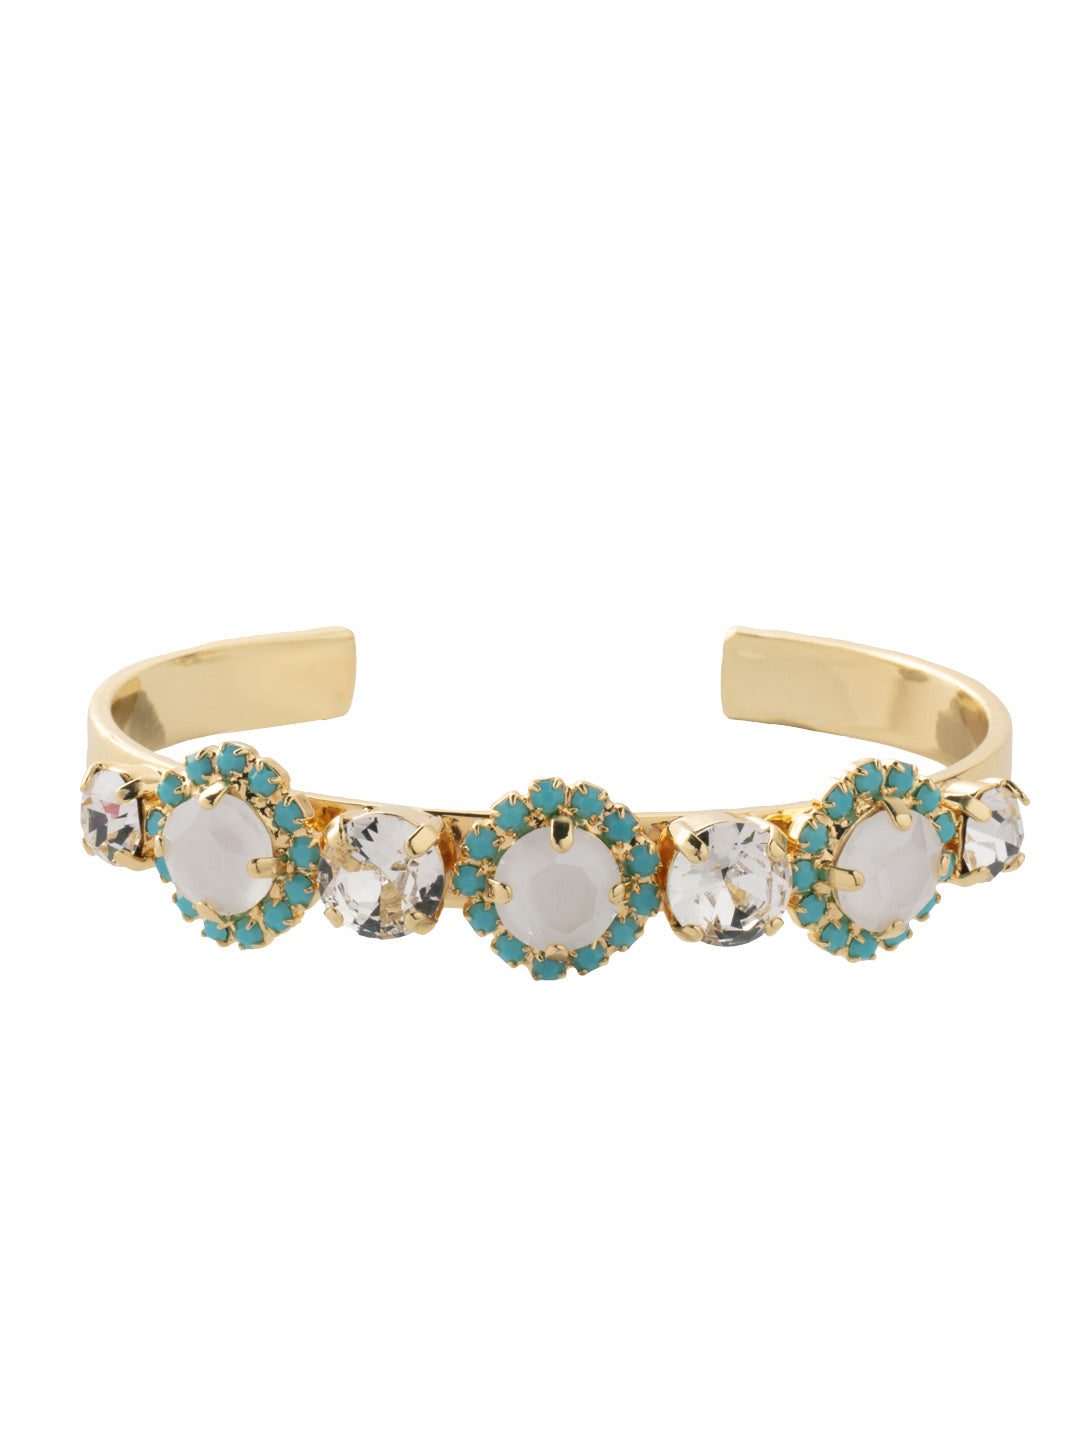 Haute Halo Lined Cuff Bracelet - BEY11BGSTO - <p>The Haute Halo Lined Cuff Bracelet is a great statement piece; alternating halo and round-cut crystals line an adjustable cuff band. From Sorrelli's Santorini collection in our Bright Gold-tone finish.</p>